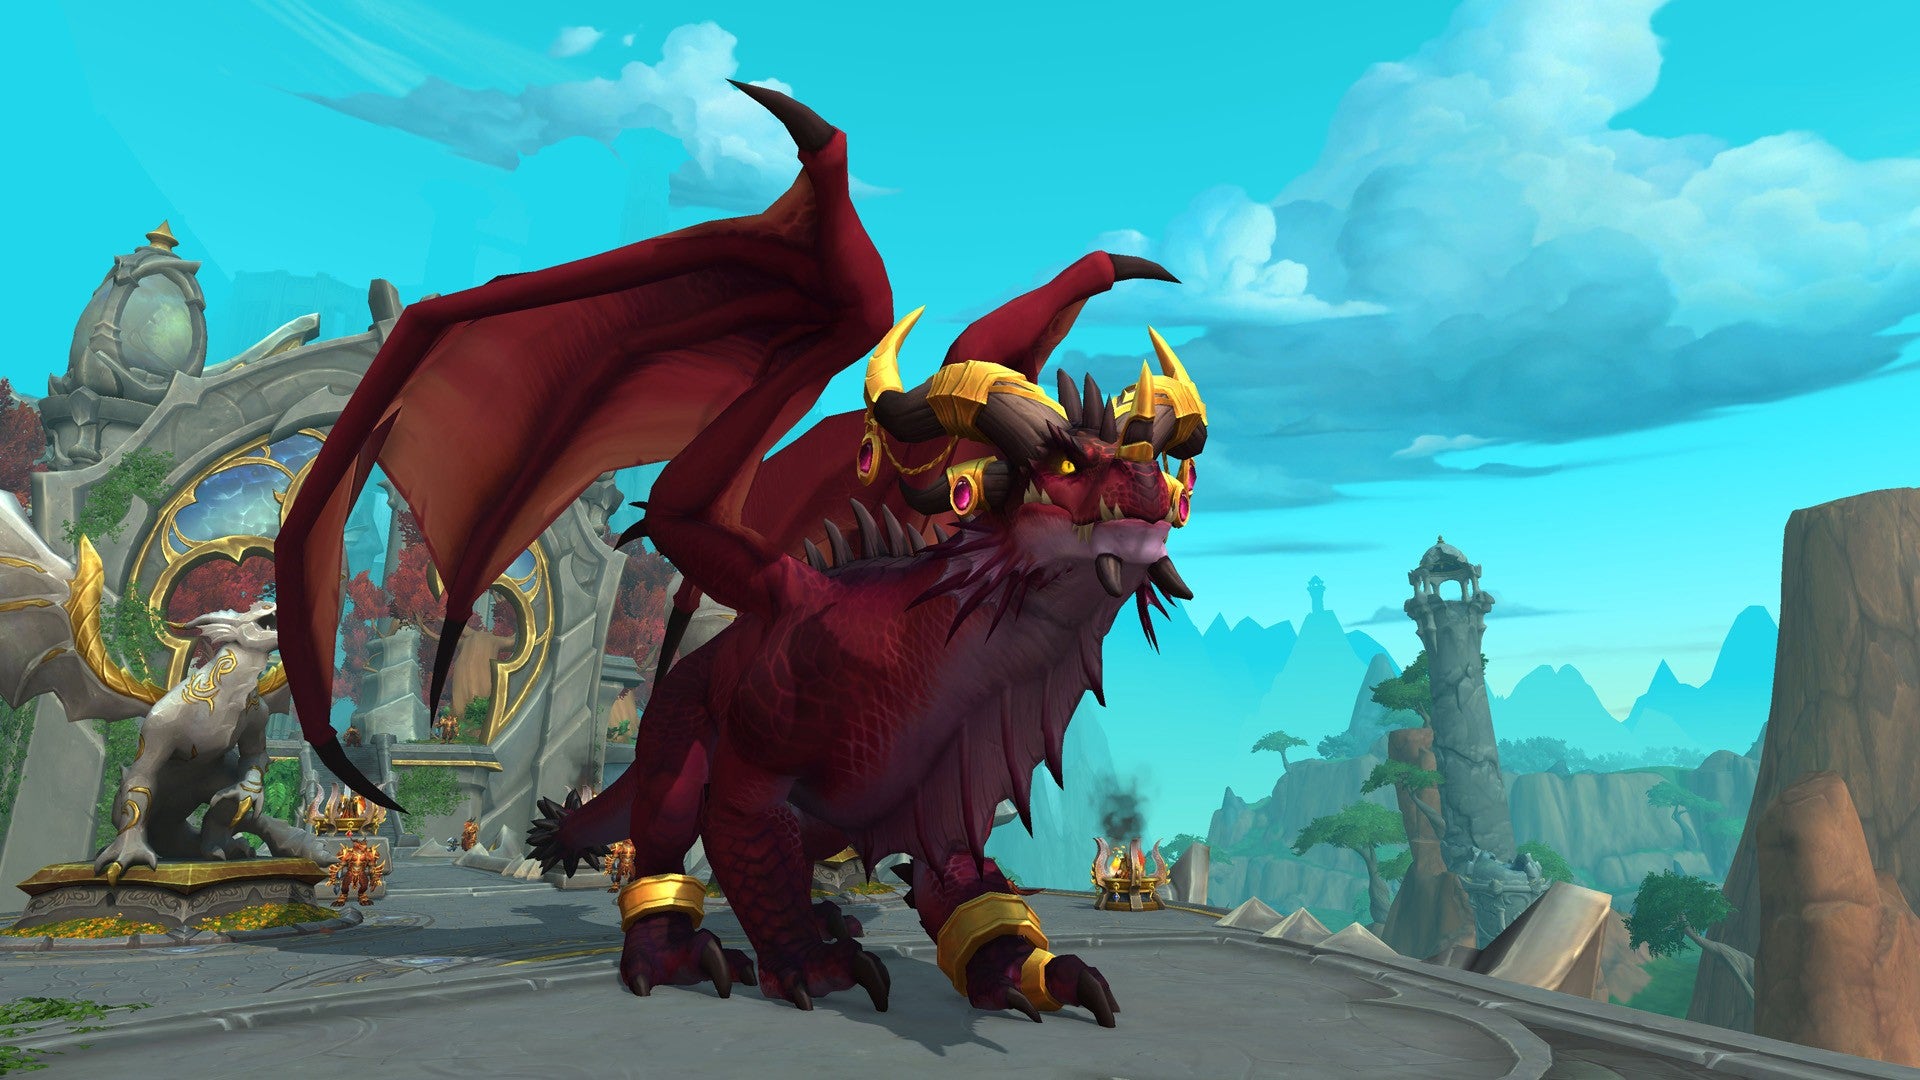 World Of Warcraft: Dragonflight aiming to launch in 2022